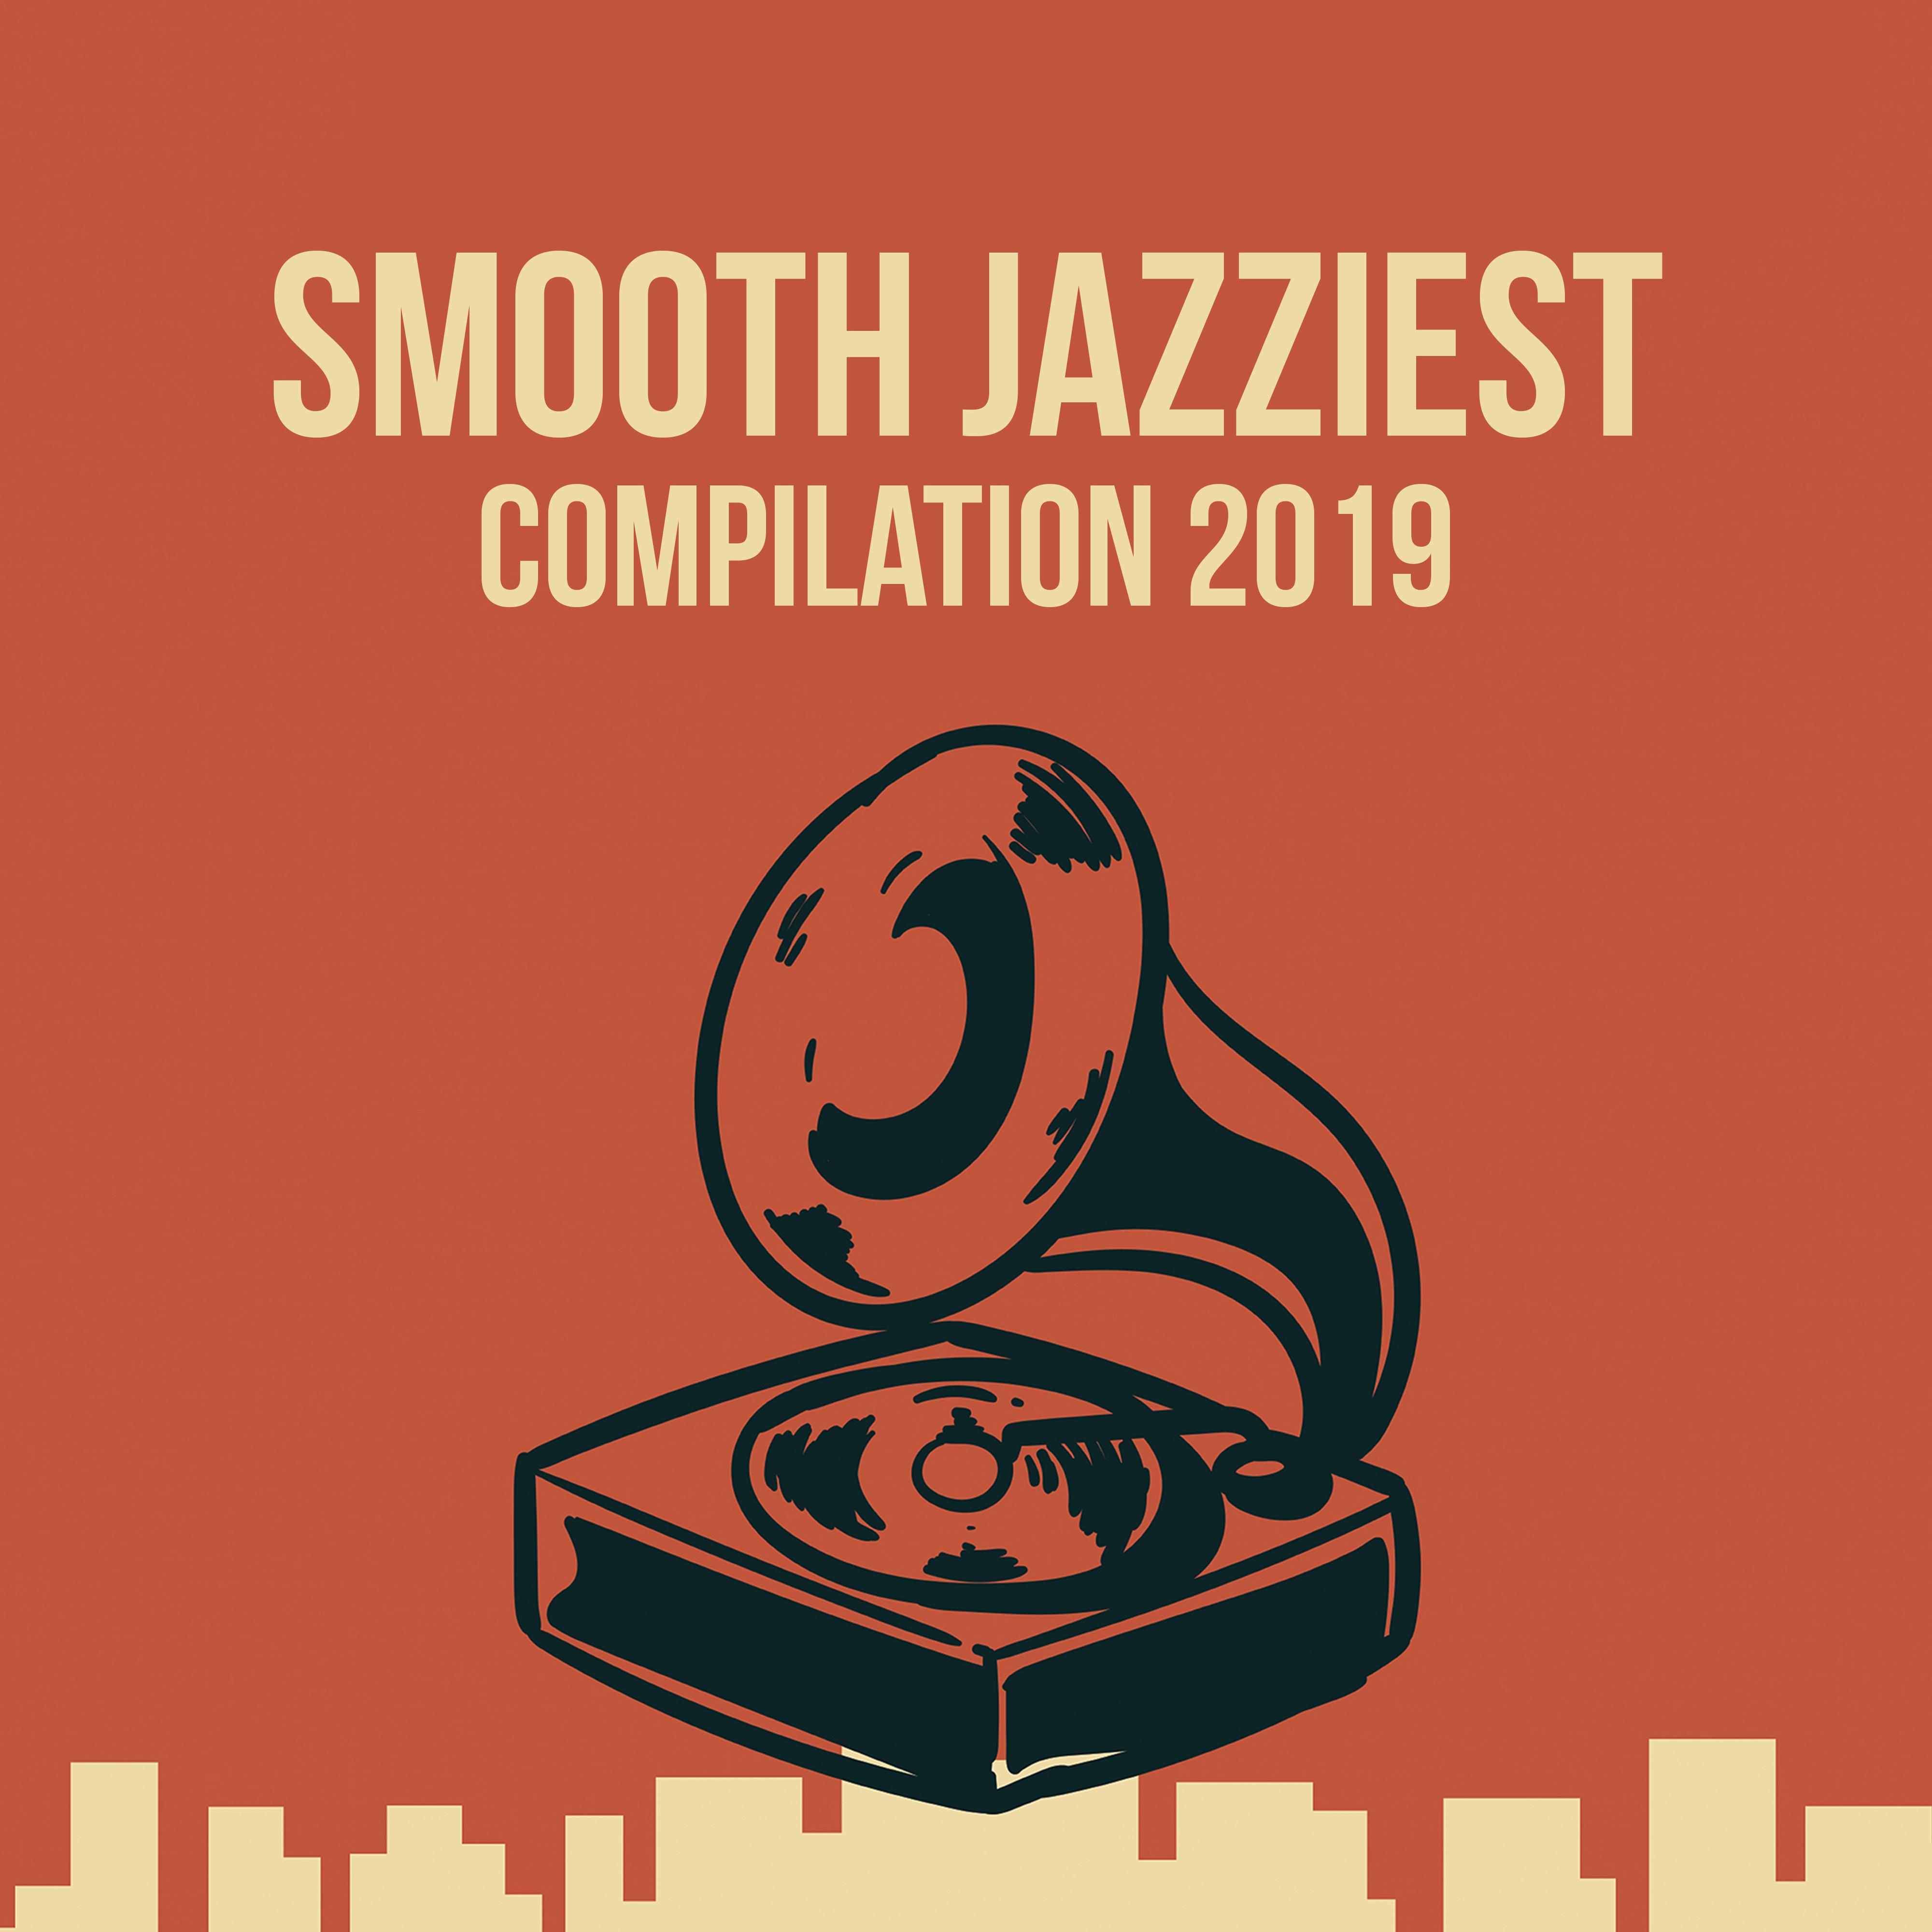 Smooth Jazziest Compilation 2019: 15 Instrumental Jazz Songs with Vintage Melodies Perfect for Relaxing, Nice Time Spending with Love & Friends